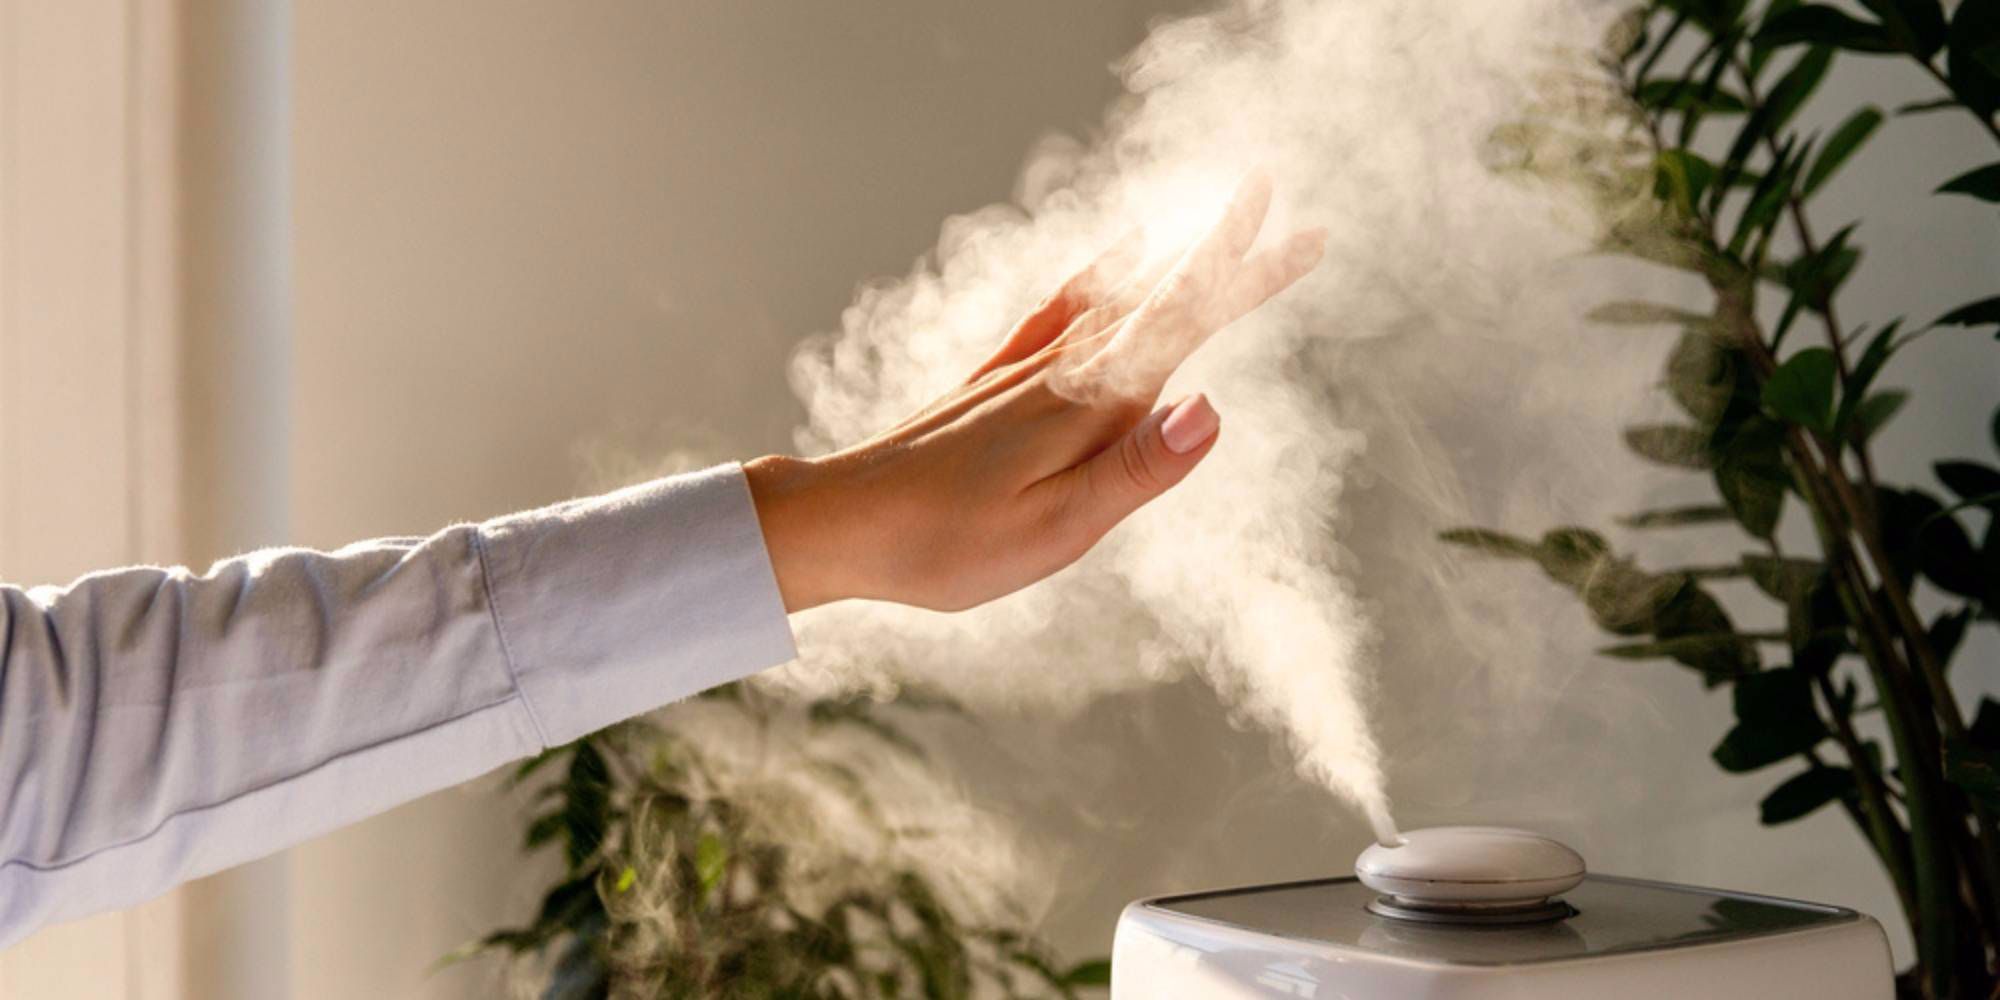 How to Use A Humidifier Effectively For Cough & Congestion